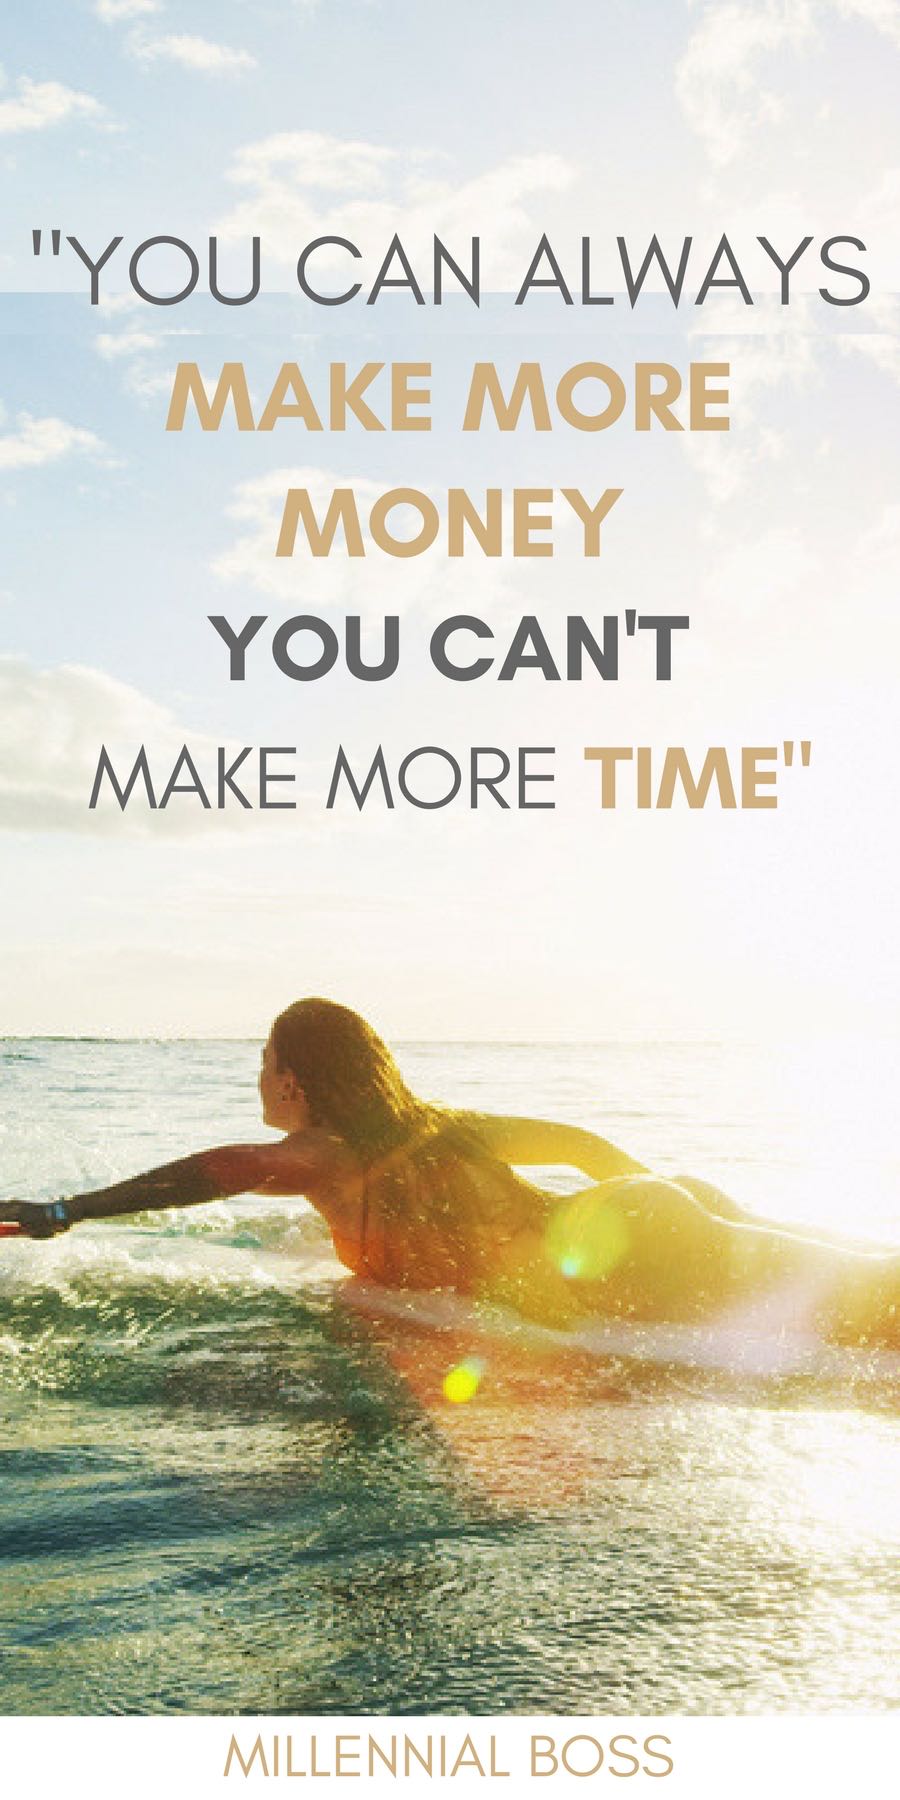 Life is too short to chase money - Read about entrepreneurs who chose freedom and time over money